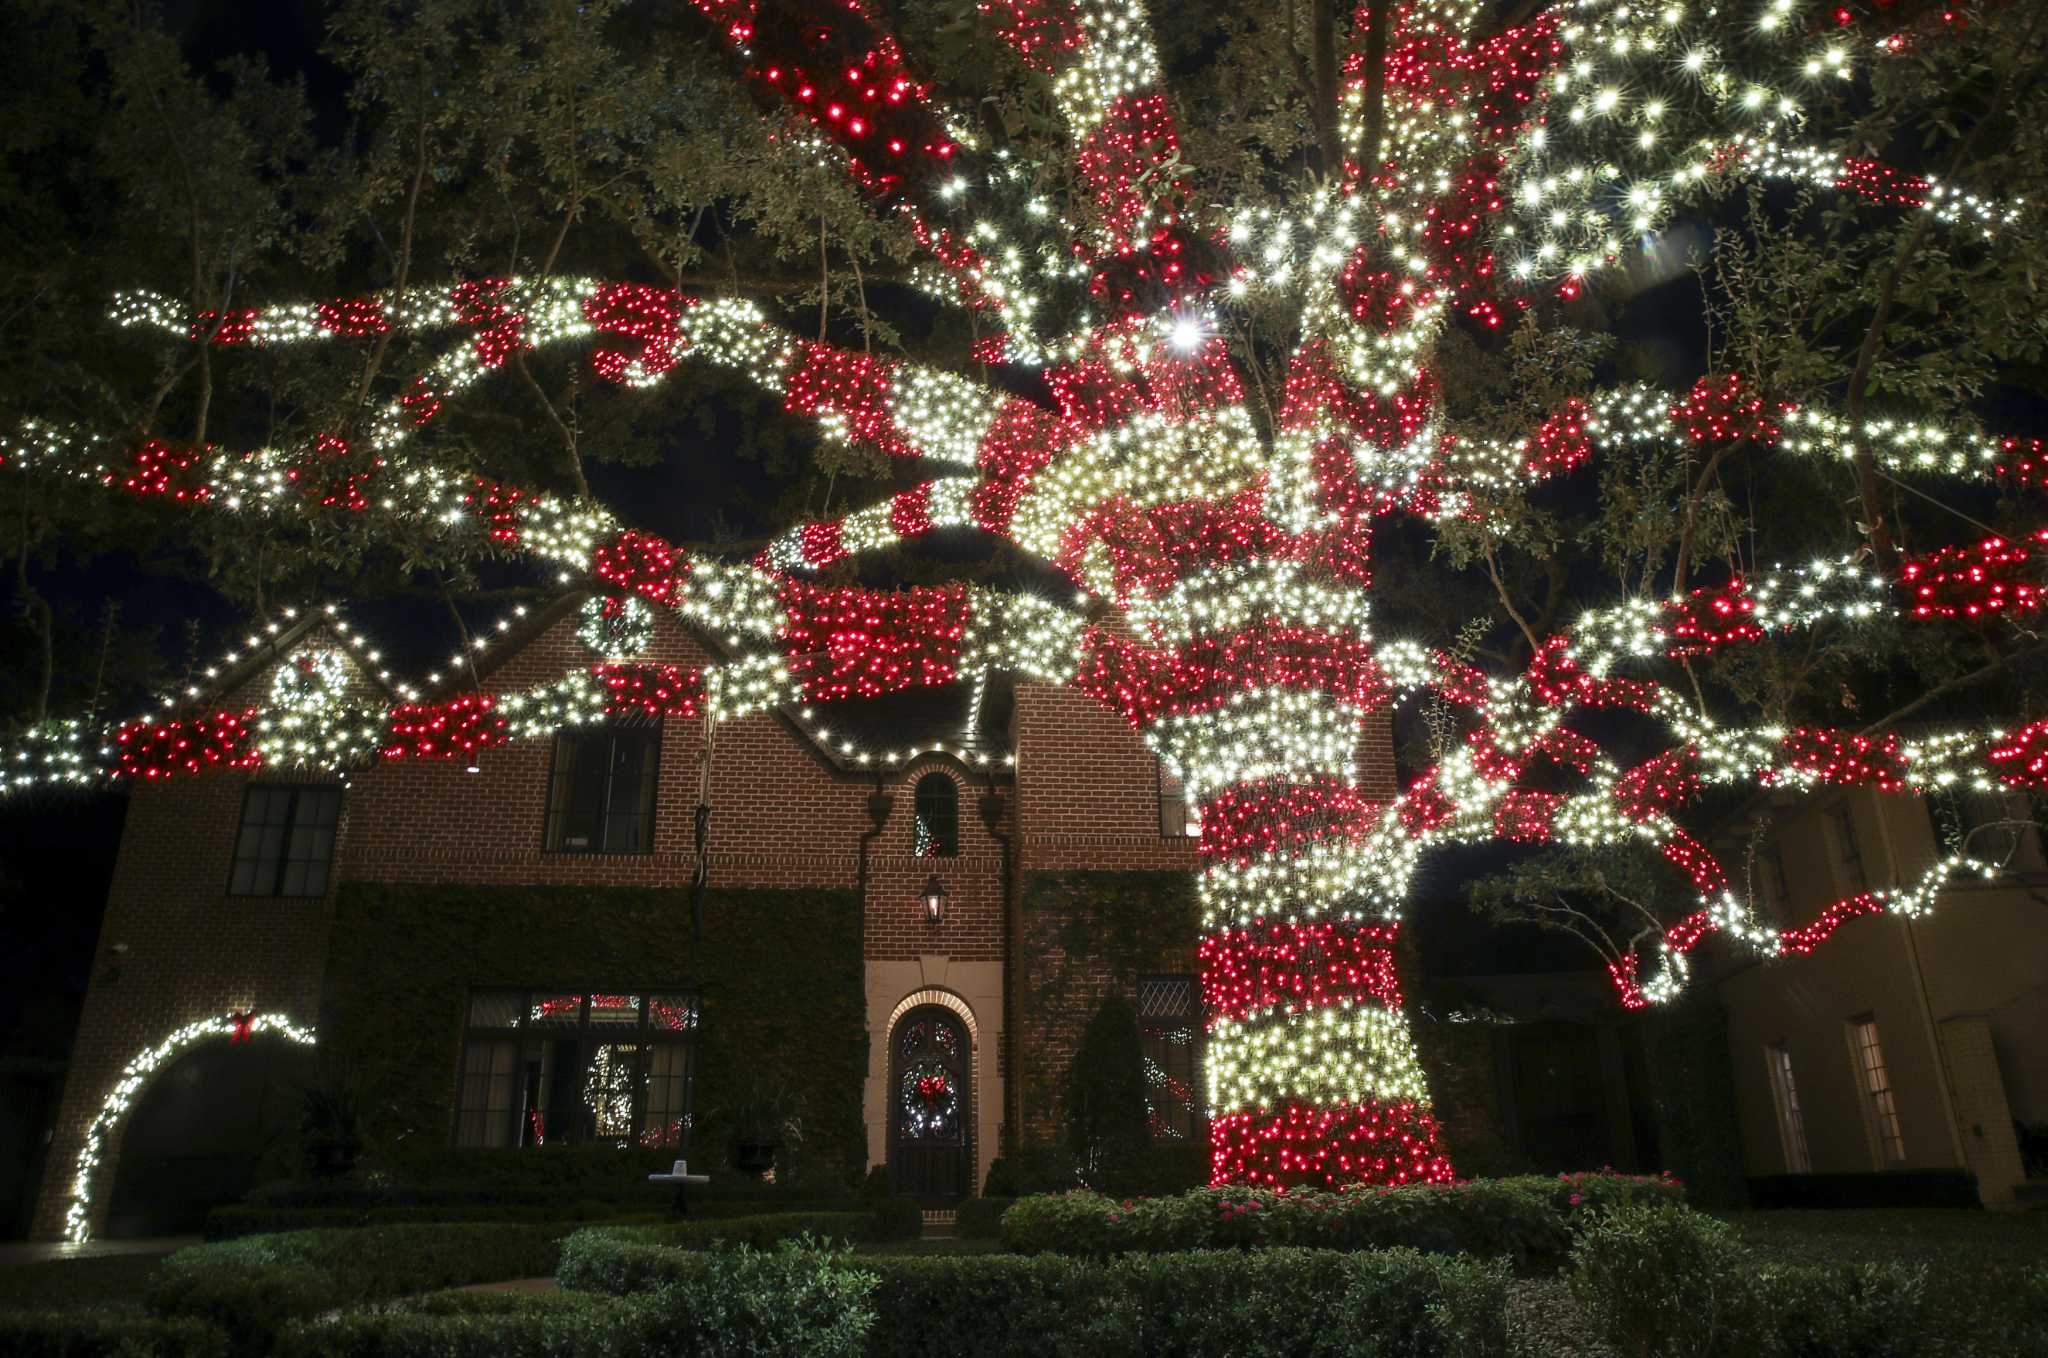 8 great places to see Christmas lights in Houston